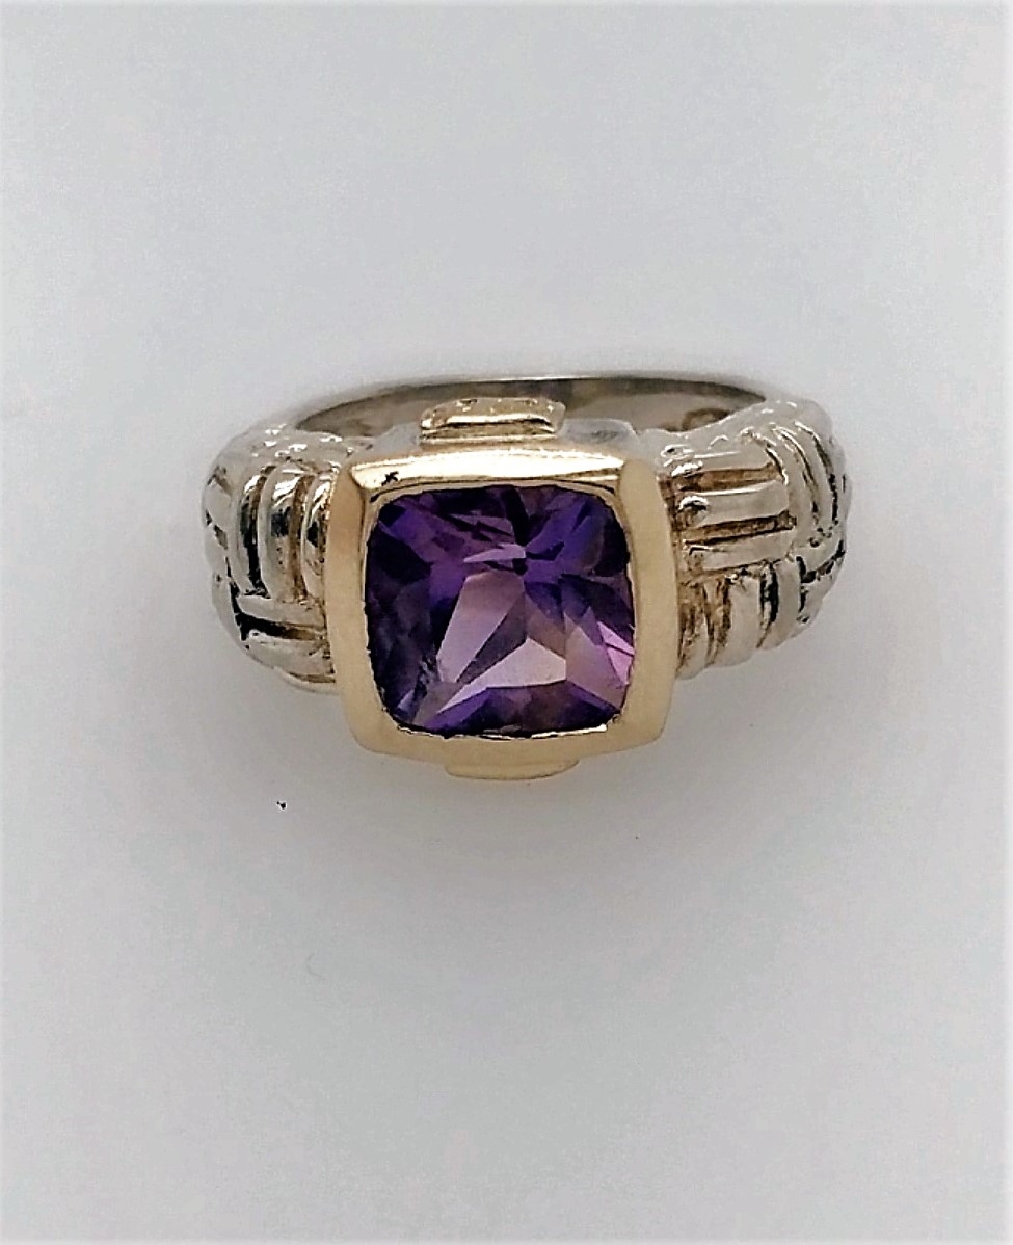 Sterling silver and 14k yellow gold bezel set amethyst ring. Size 6.25.